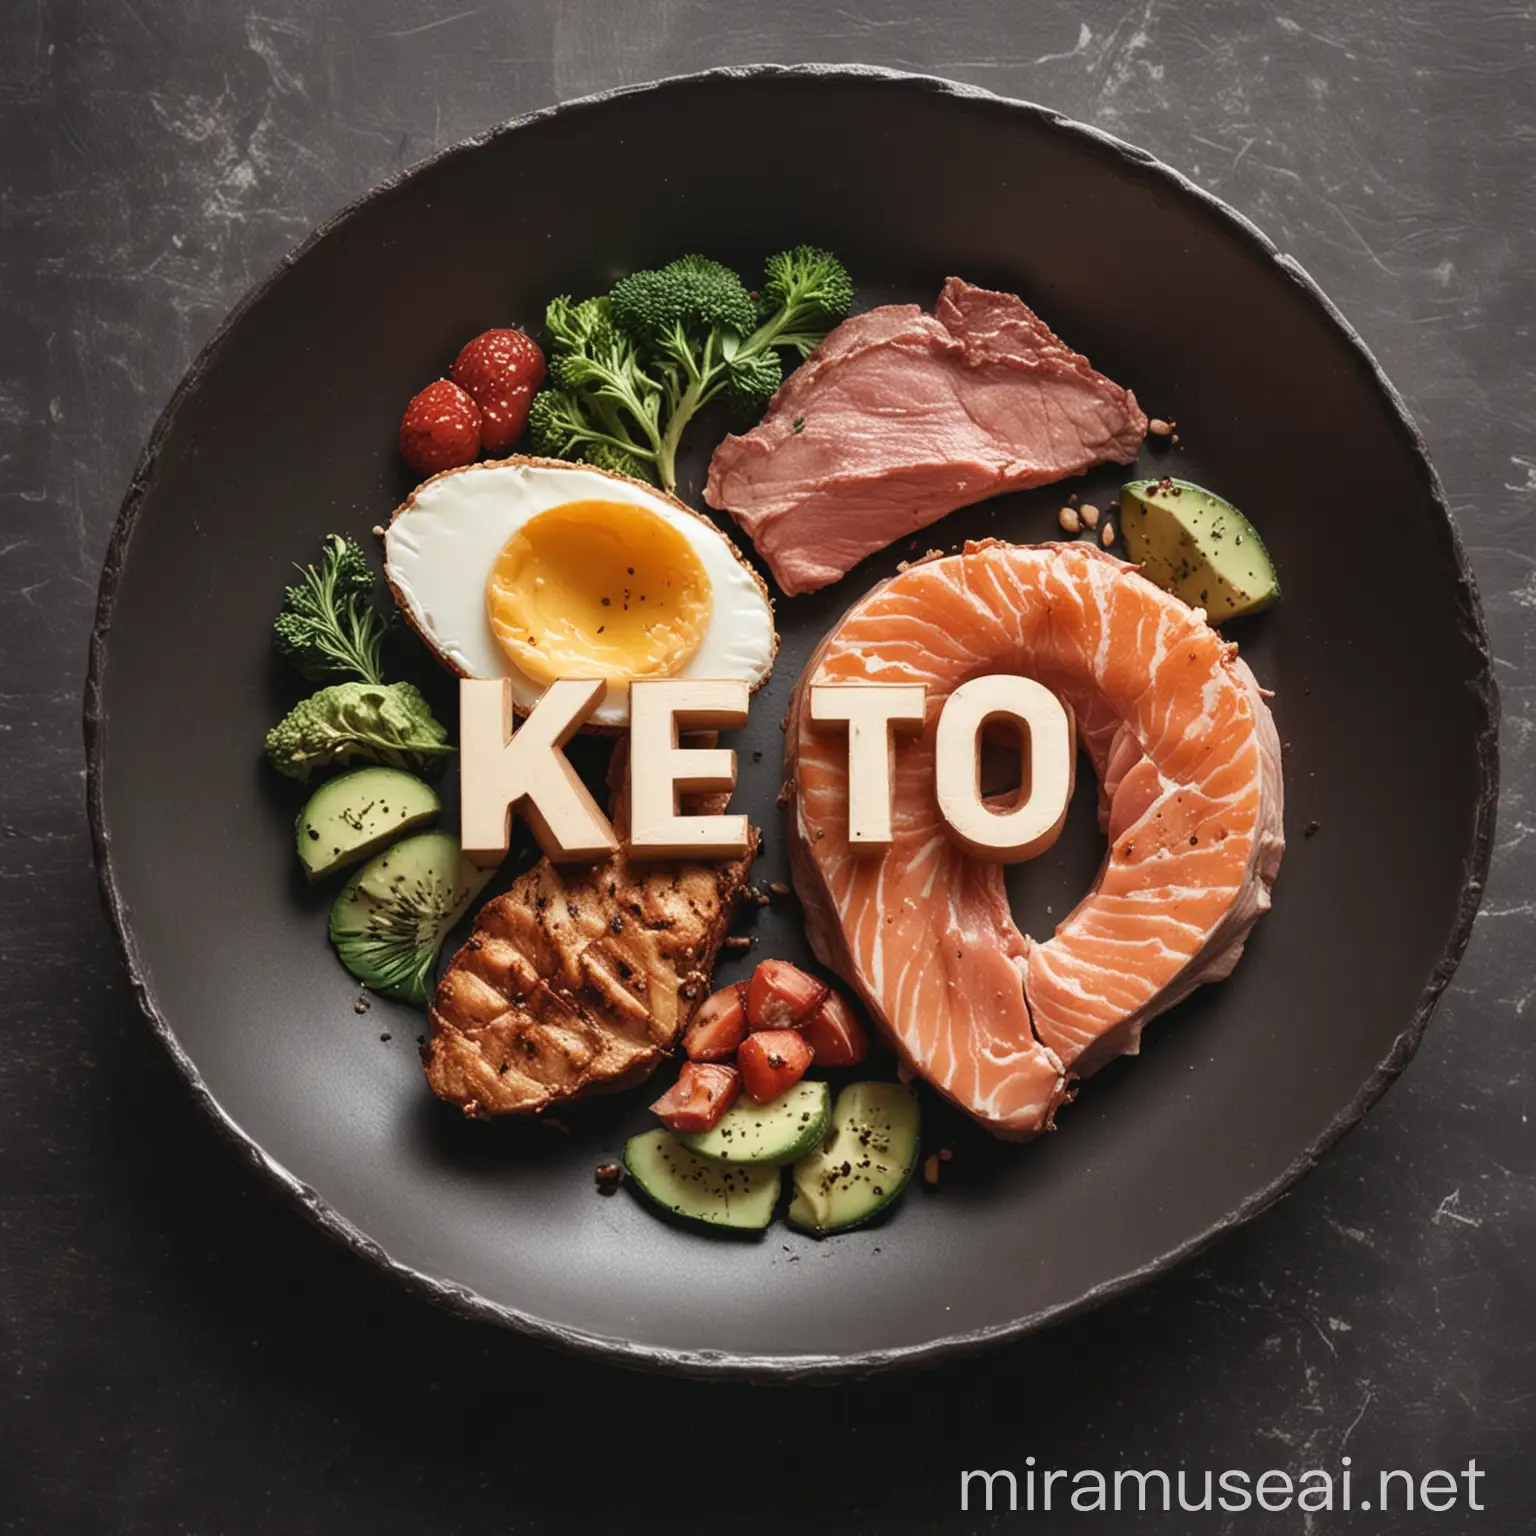 Keto Diet Conceptual Illustration with No Letters